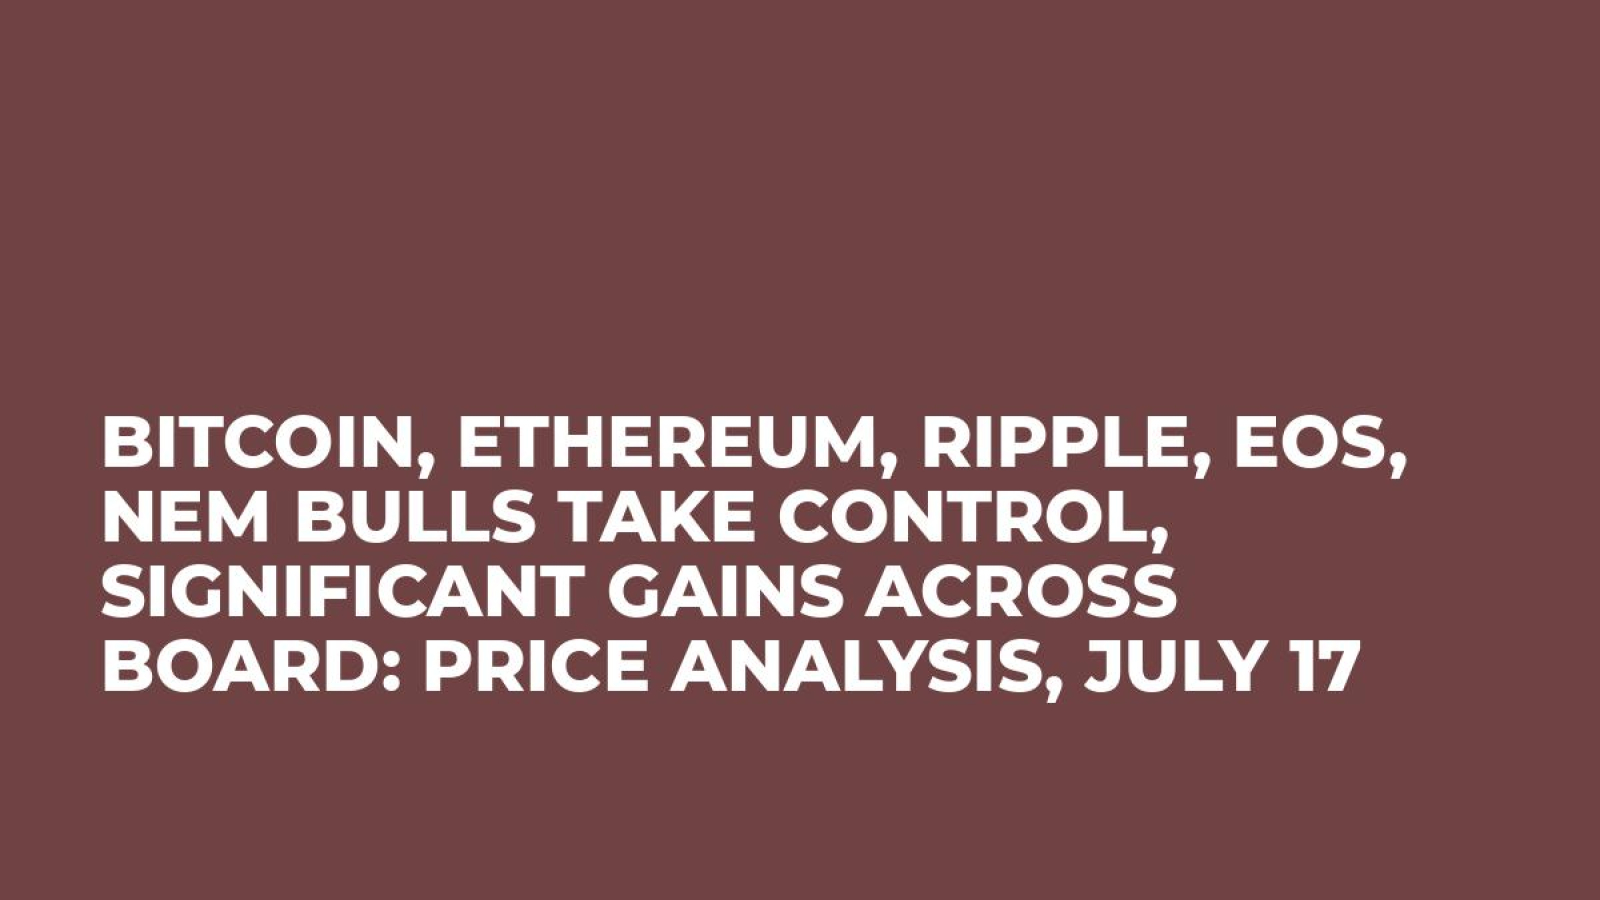 Bitcoin, Ethereum, Ripple, EOS, NEM Bulls Take Control, Significant Gains Across Board: Price Analysis, July 17